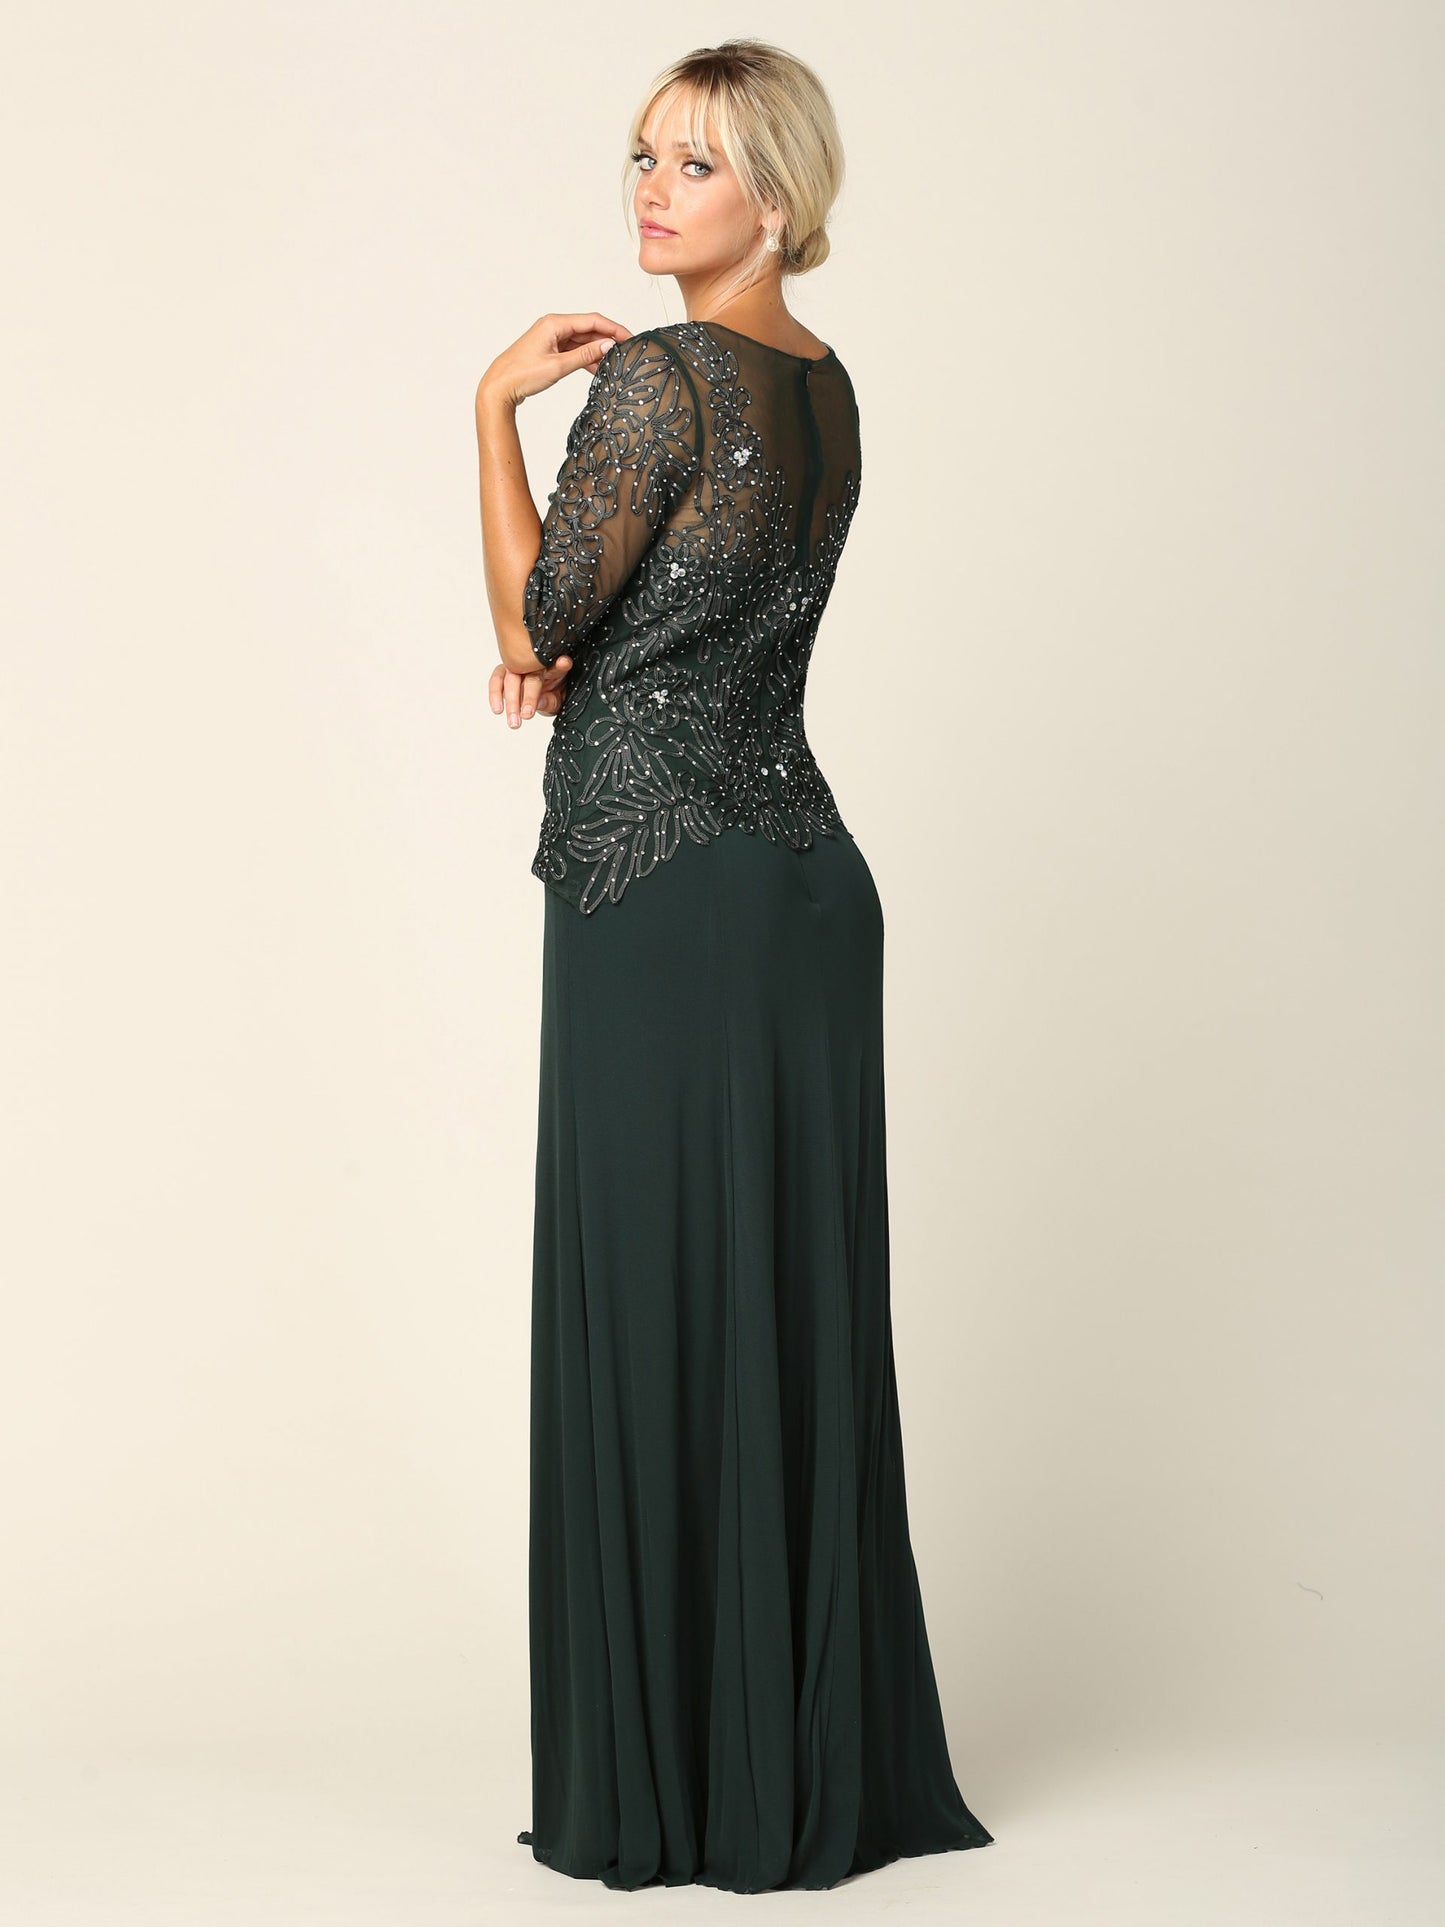 EA24-5222 Mama Half Sleeve Embroidered Gown in Stretch Power Mesh